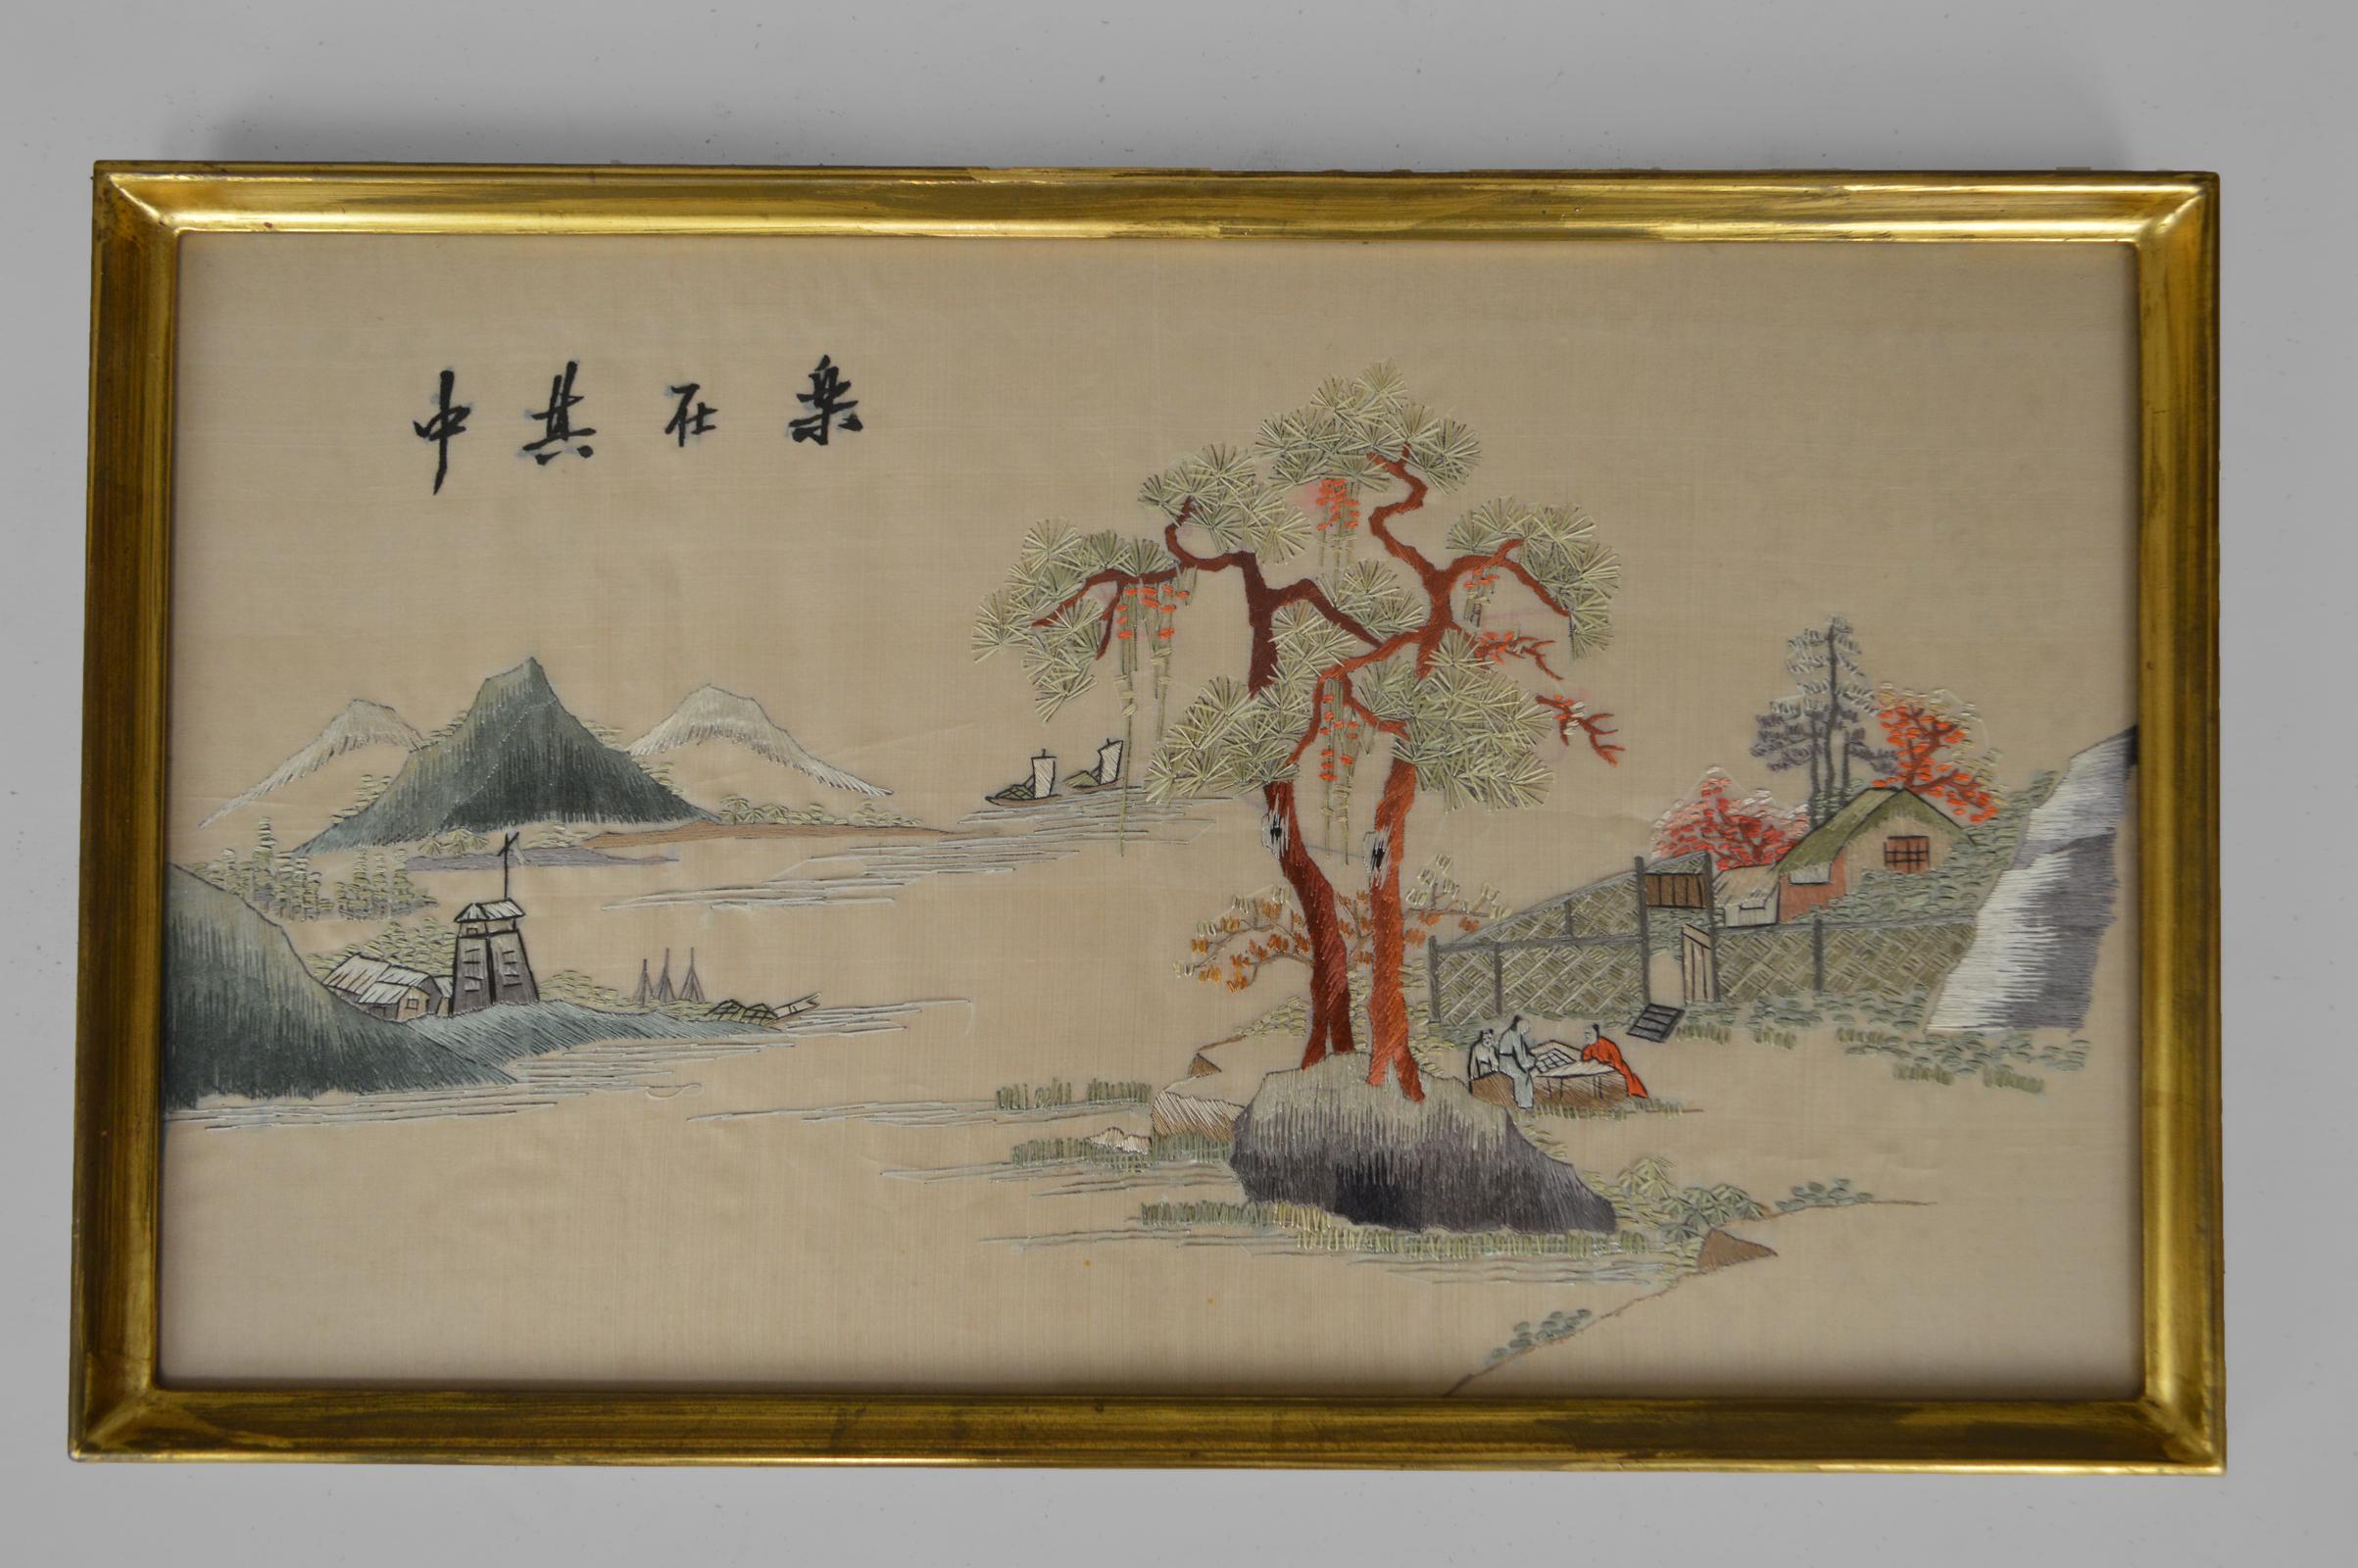 Beautiful handmade silk embroidery, framed under glass.

We see a landscape where a lake or a navigable river is represented, bordered by houses, forests and mountains.

Asia, old Indochina (Vietnam) or South China, early 20th century.

In very good